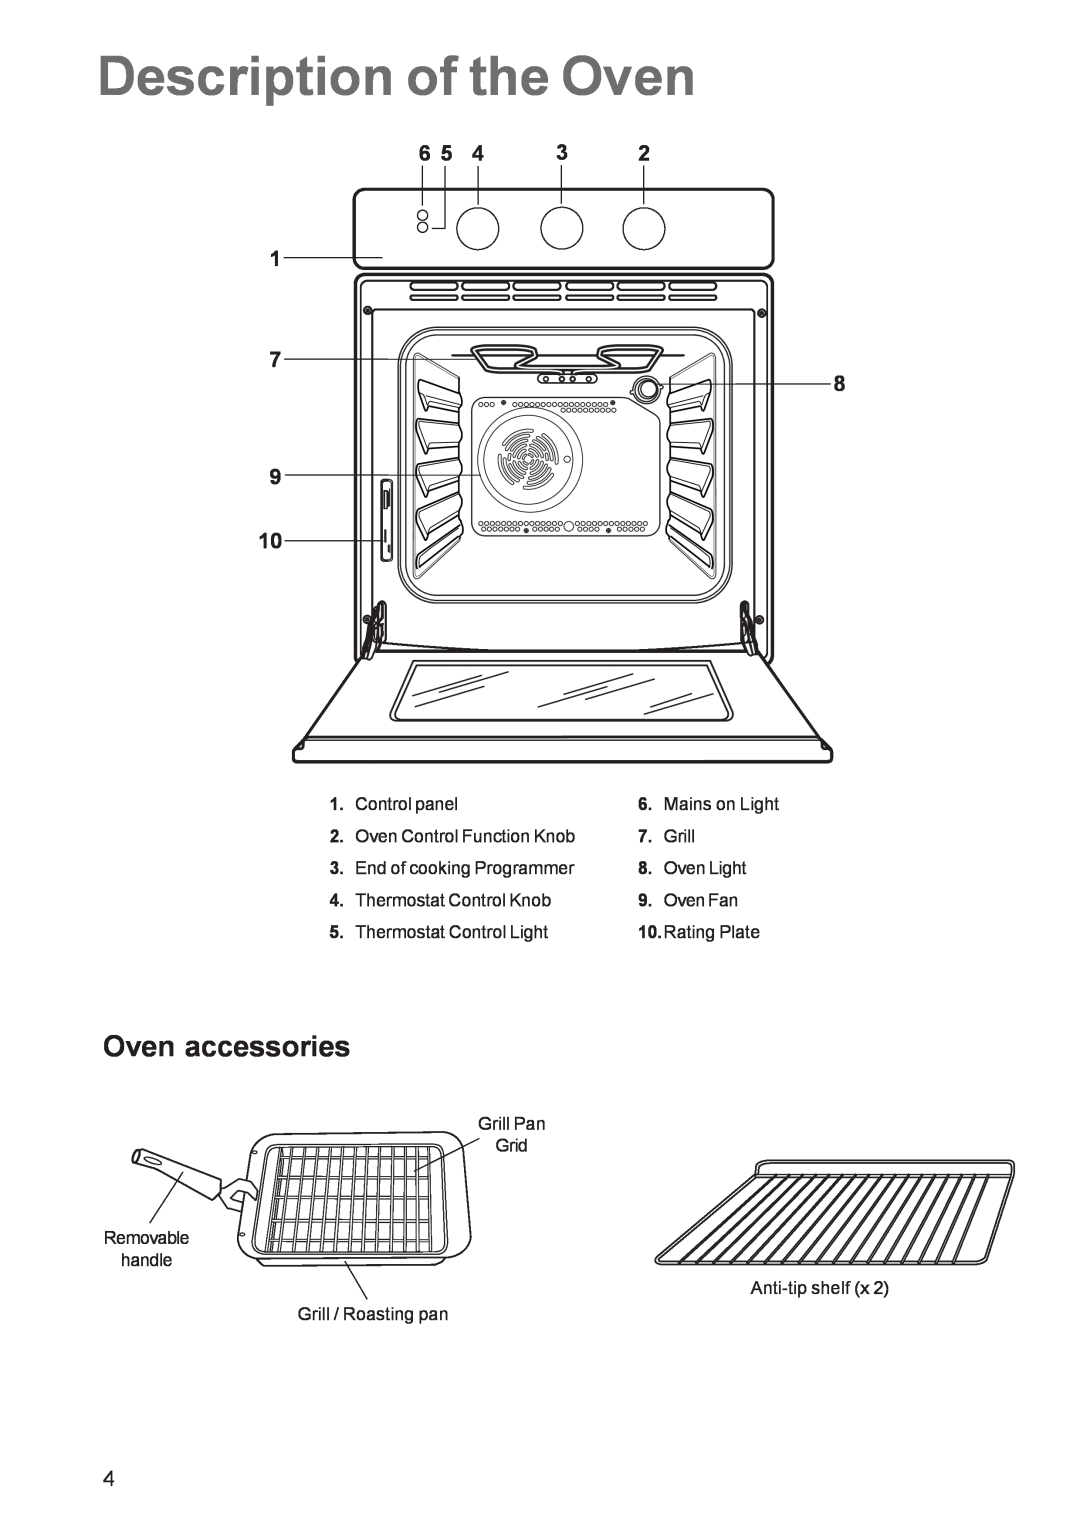 Zanussi ZBF 260 manual Description of the Oven, Oven accessories, Control panel, Mains on Light, Oven Control Function Knob 